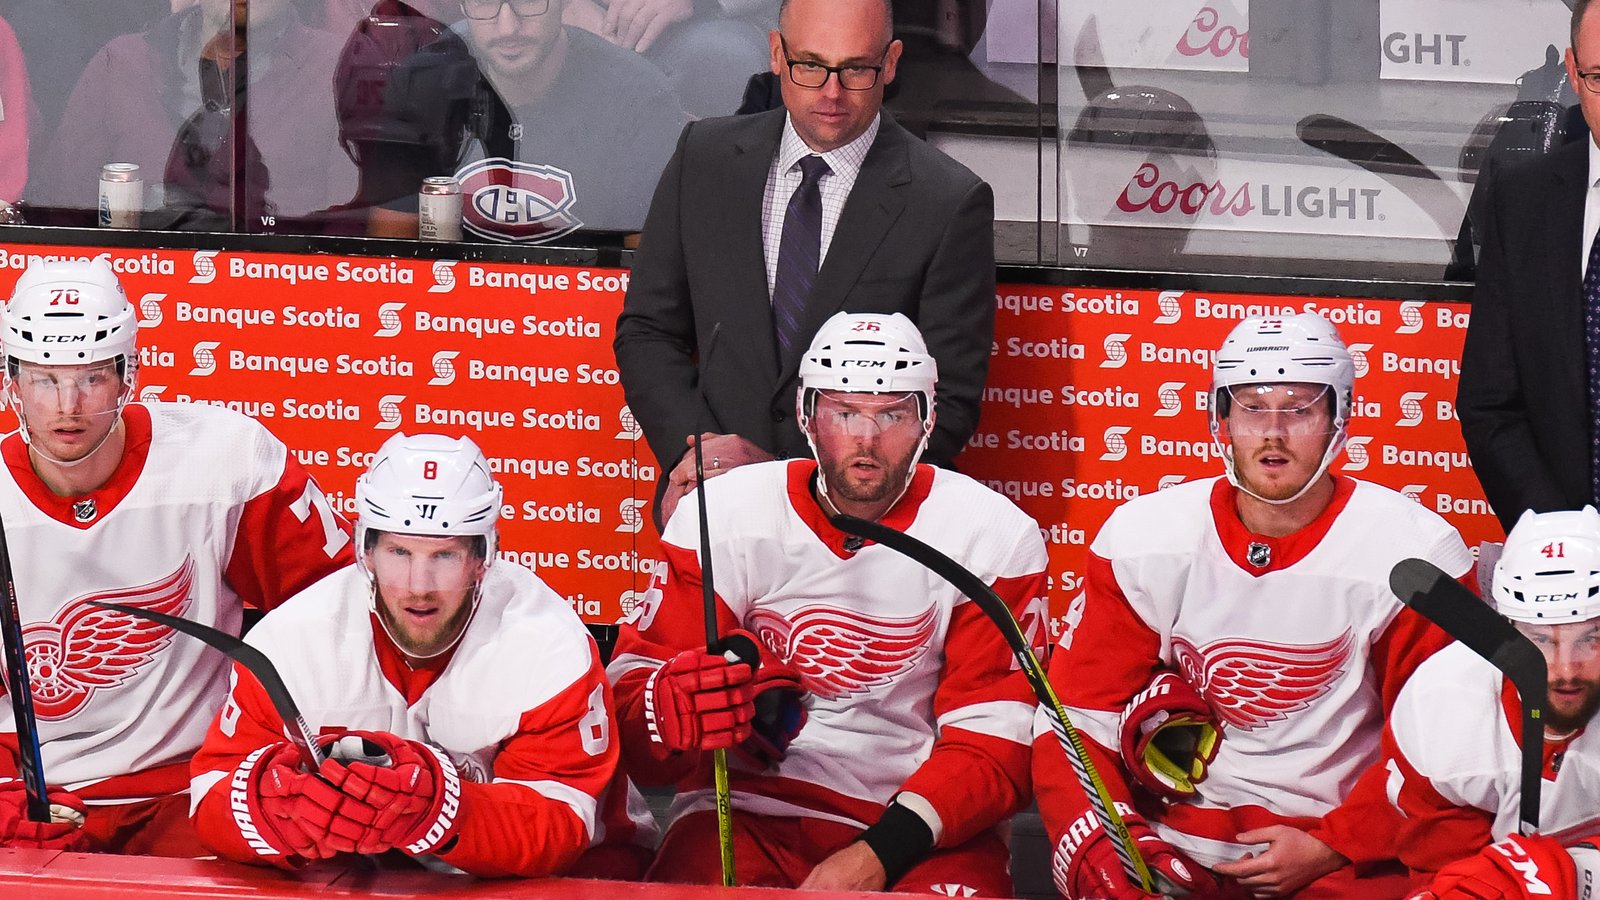 Jeff Blashill adds some excellent perspective to the NHL shutdown